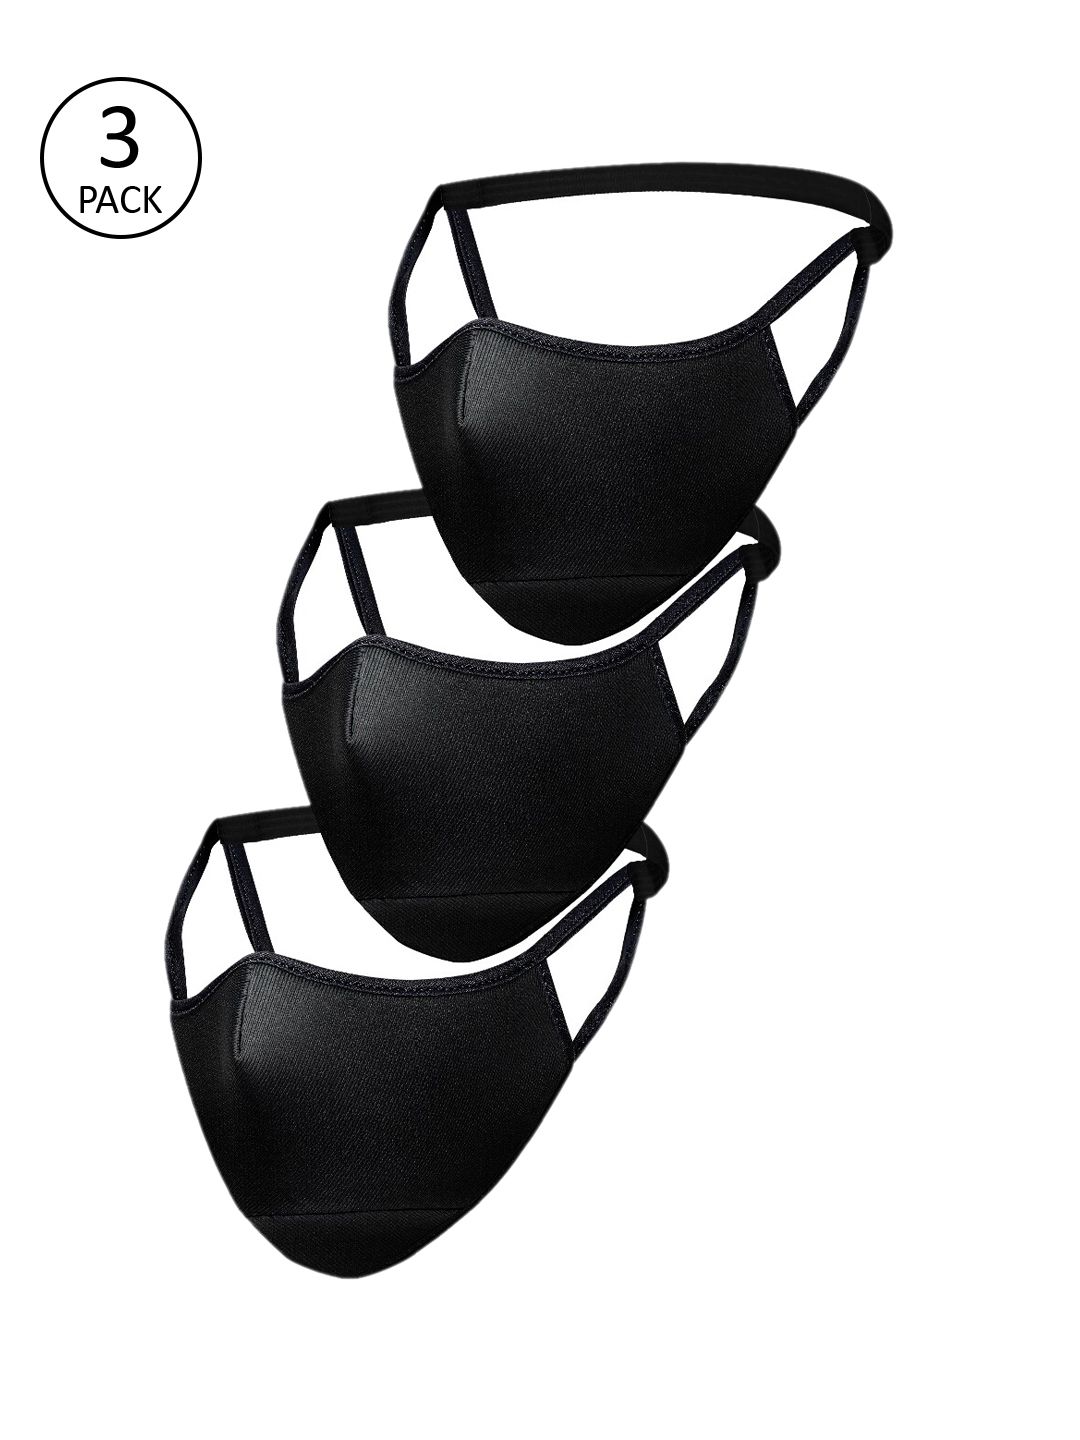 Impulse Unisex Black Pack Of 3 Reusable 4-Ply Cloth Masks Price in India